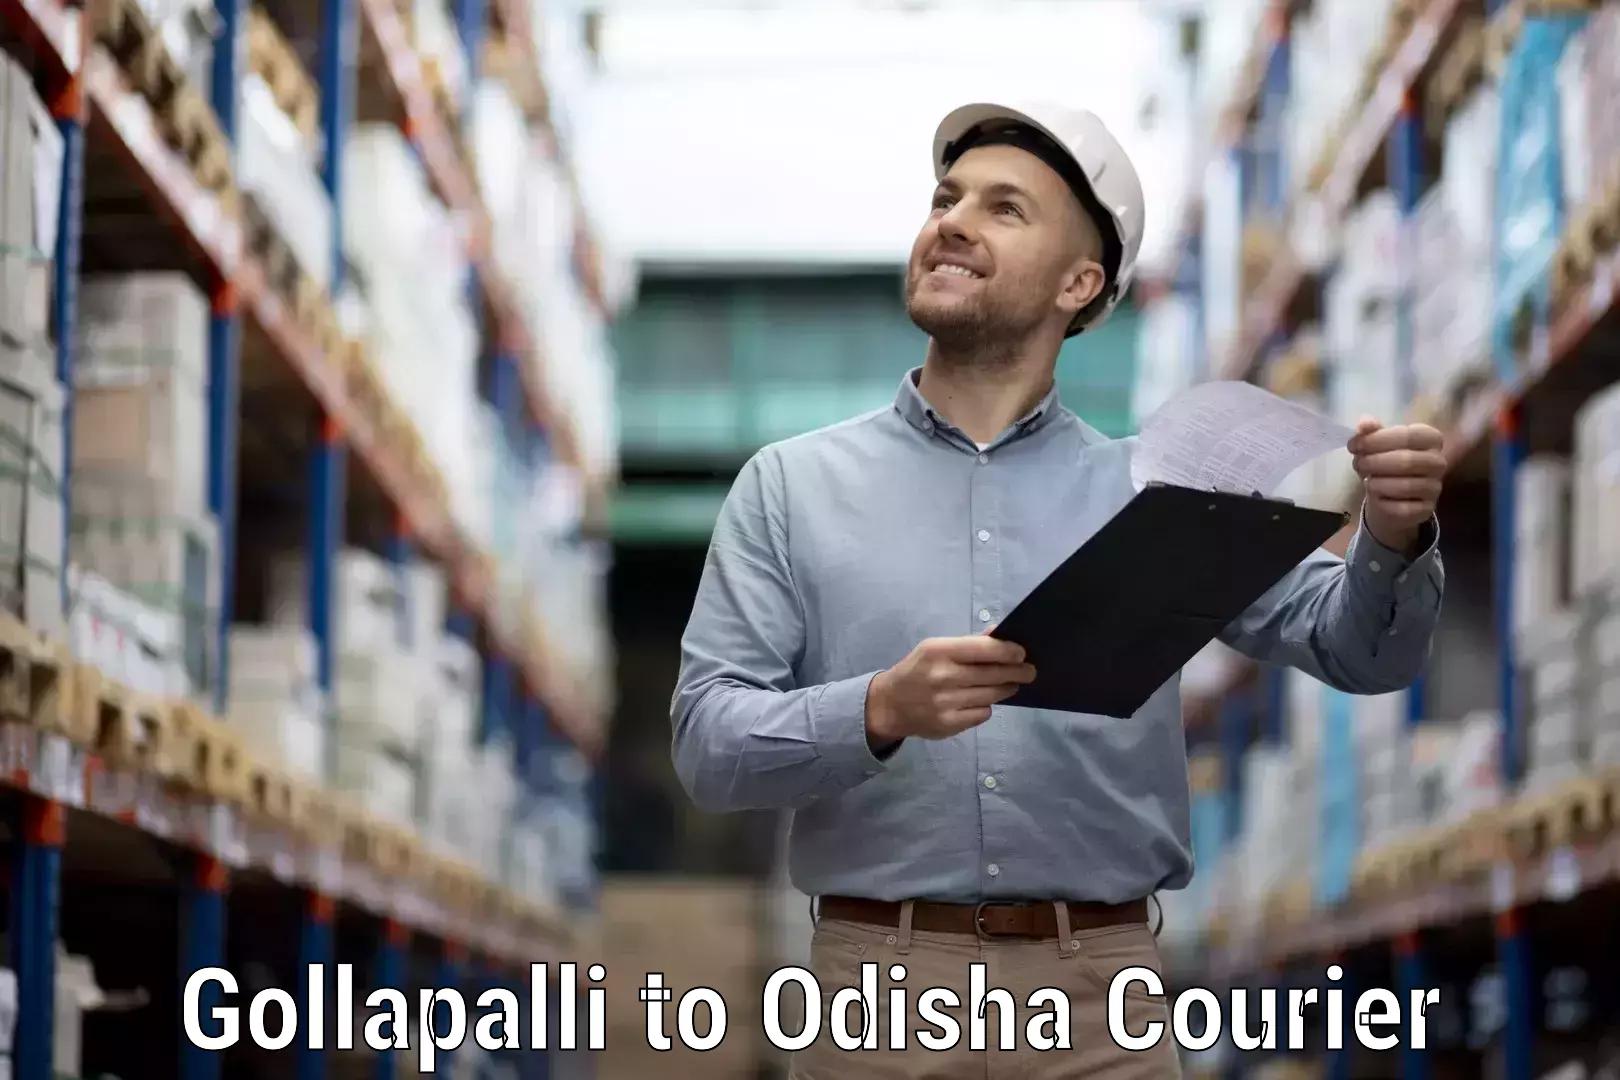 Package delivery network Gollapalli to Sinapali